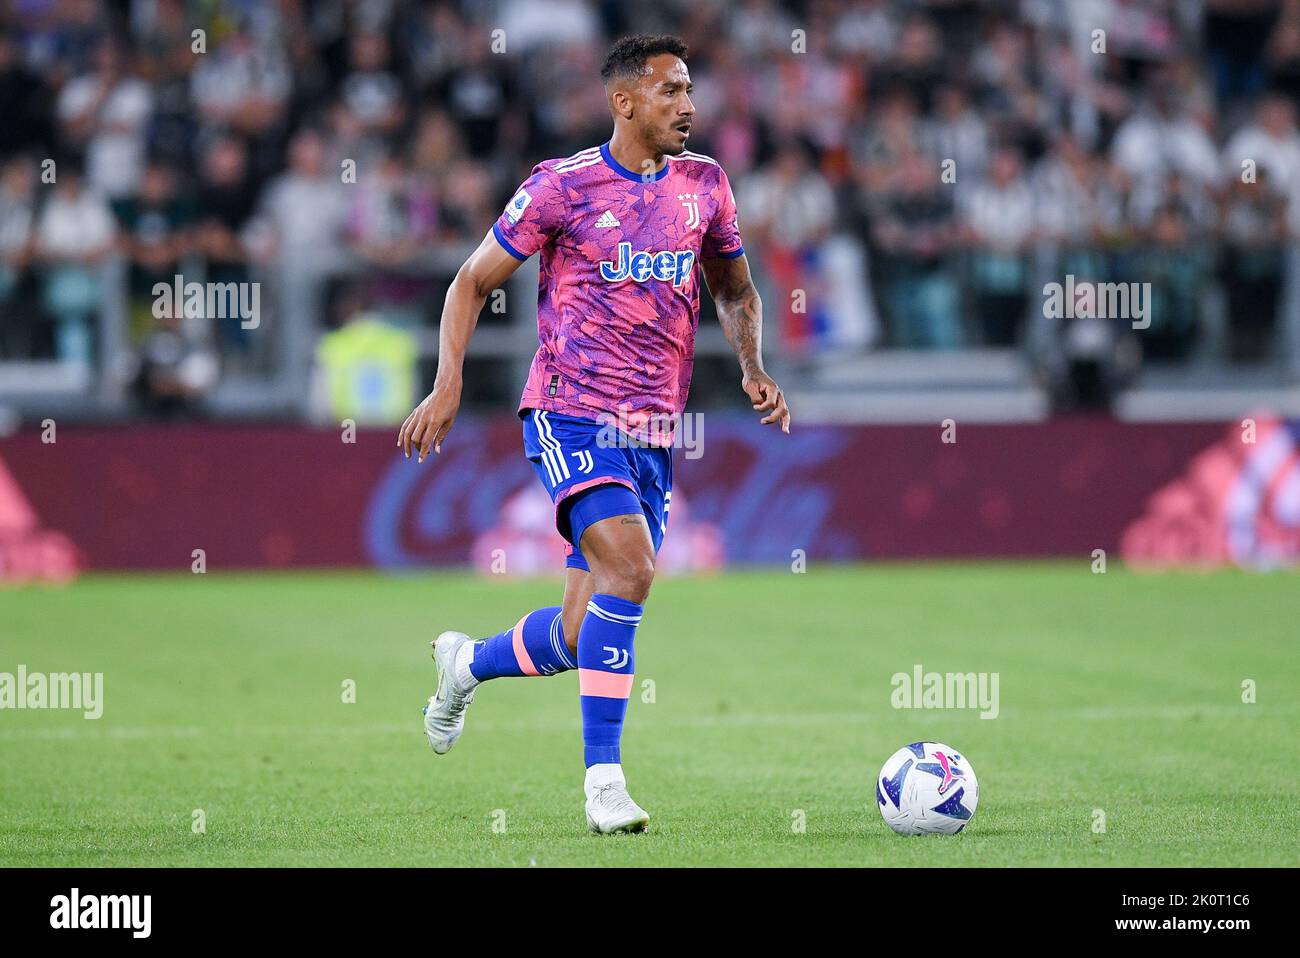 Turin, Italy. 11th Sep, 2022. Danilo of Juventus FC during the Serie A match between Juventus and US Salernitana 1919 at the Juventus Stadium, Turin, Italy on 11 September 2022. Credit: Giuseppe Maffia/Alamy Live News Stock Photo